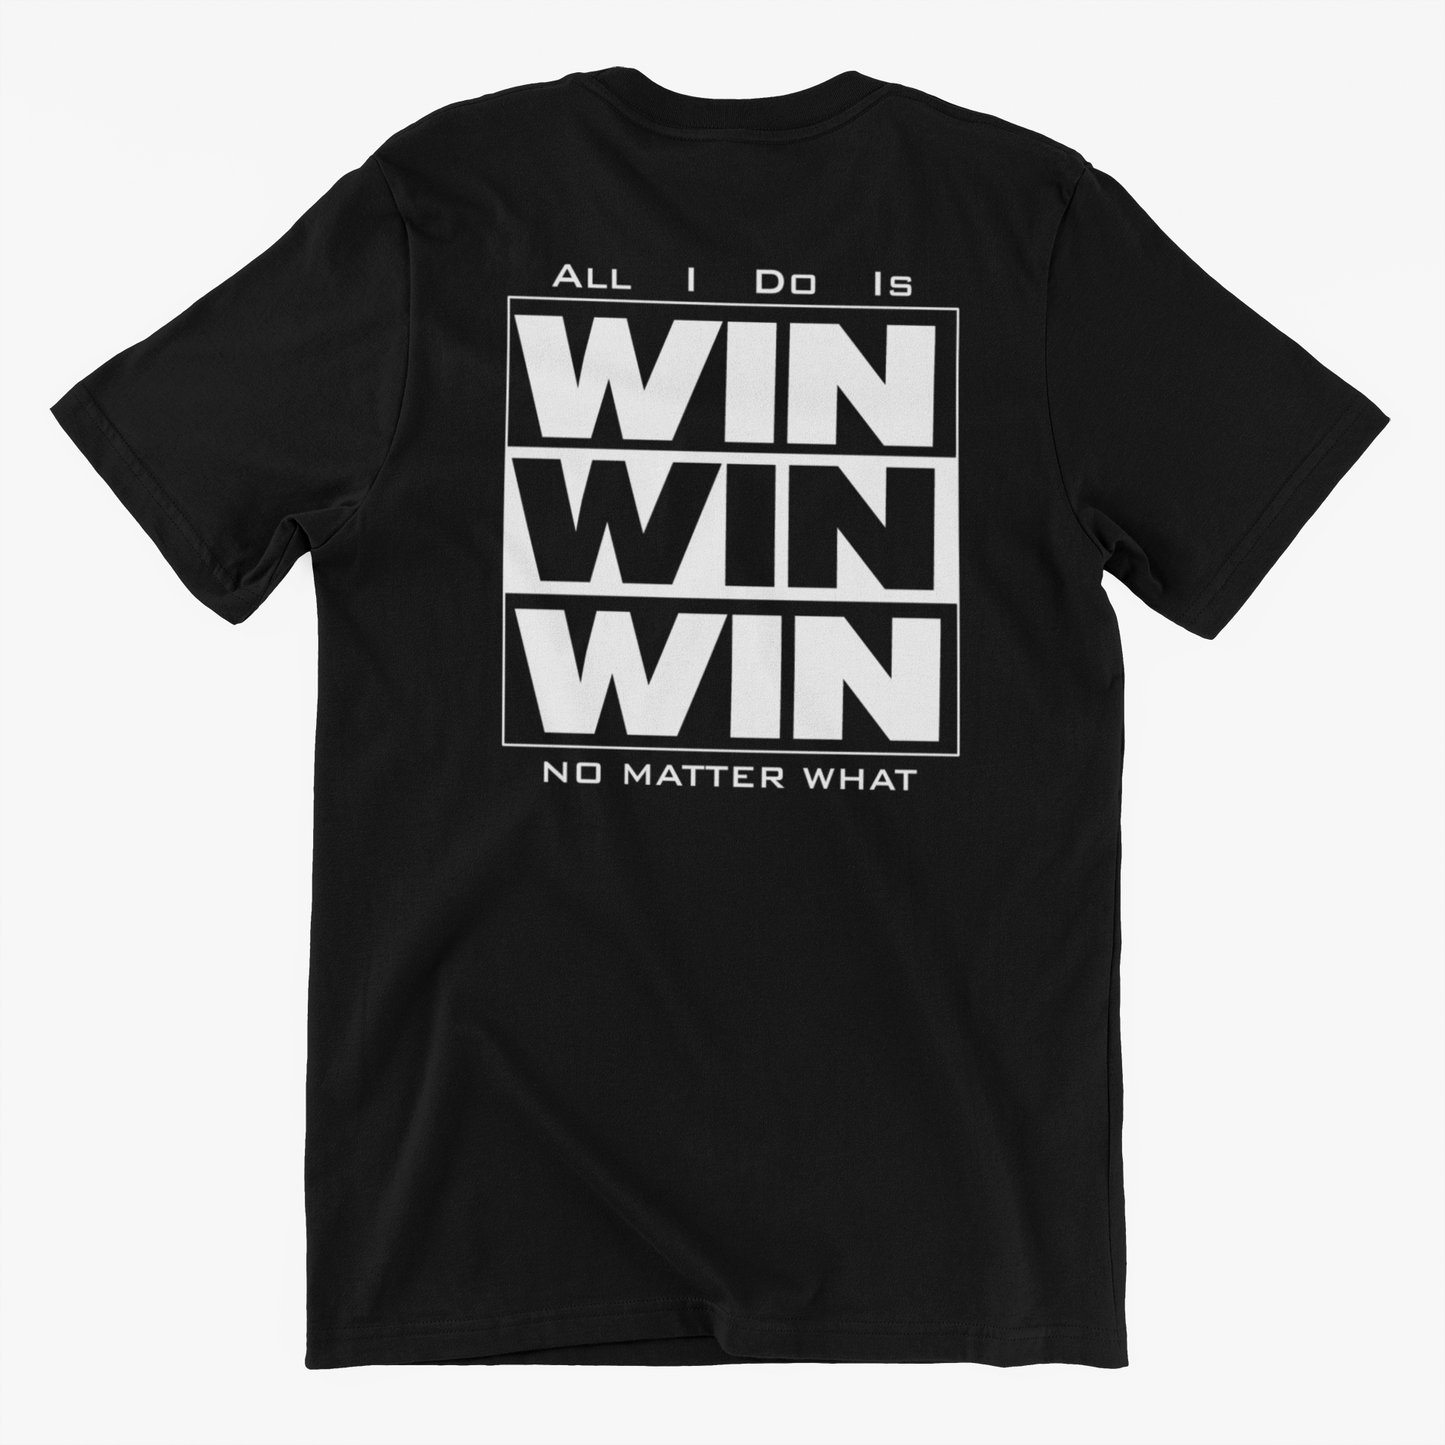 ALL I DO IS WIN WIN WIN NO MATTER WHAT black t shirts